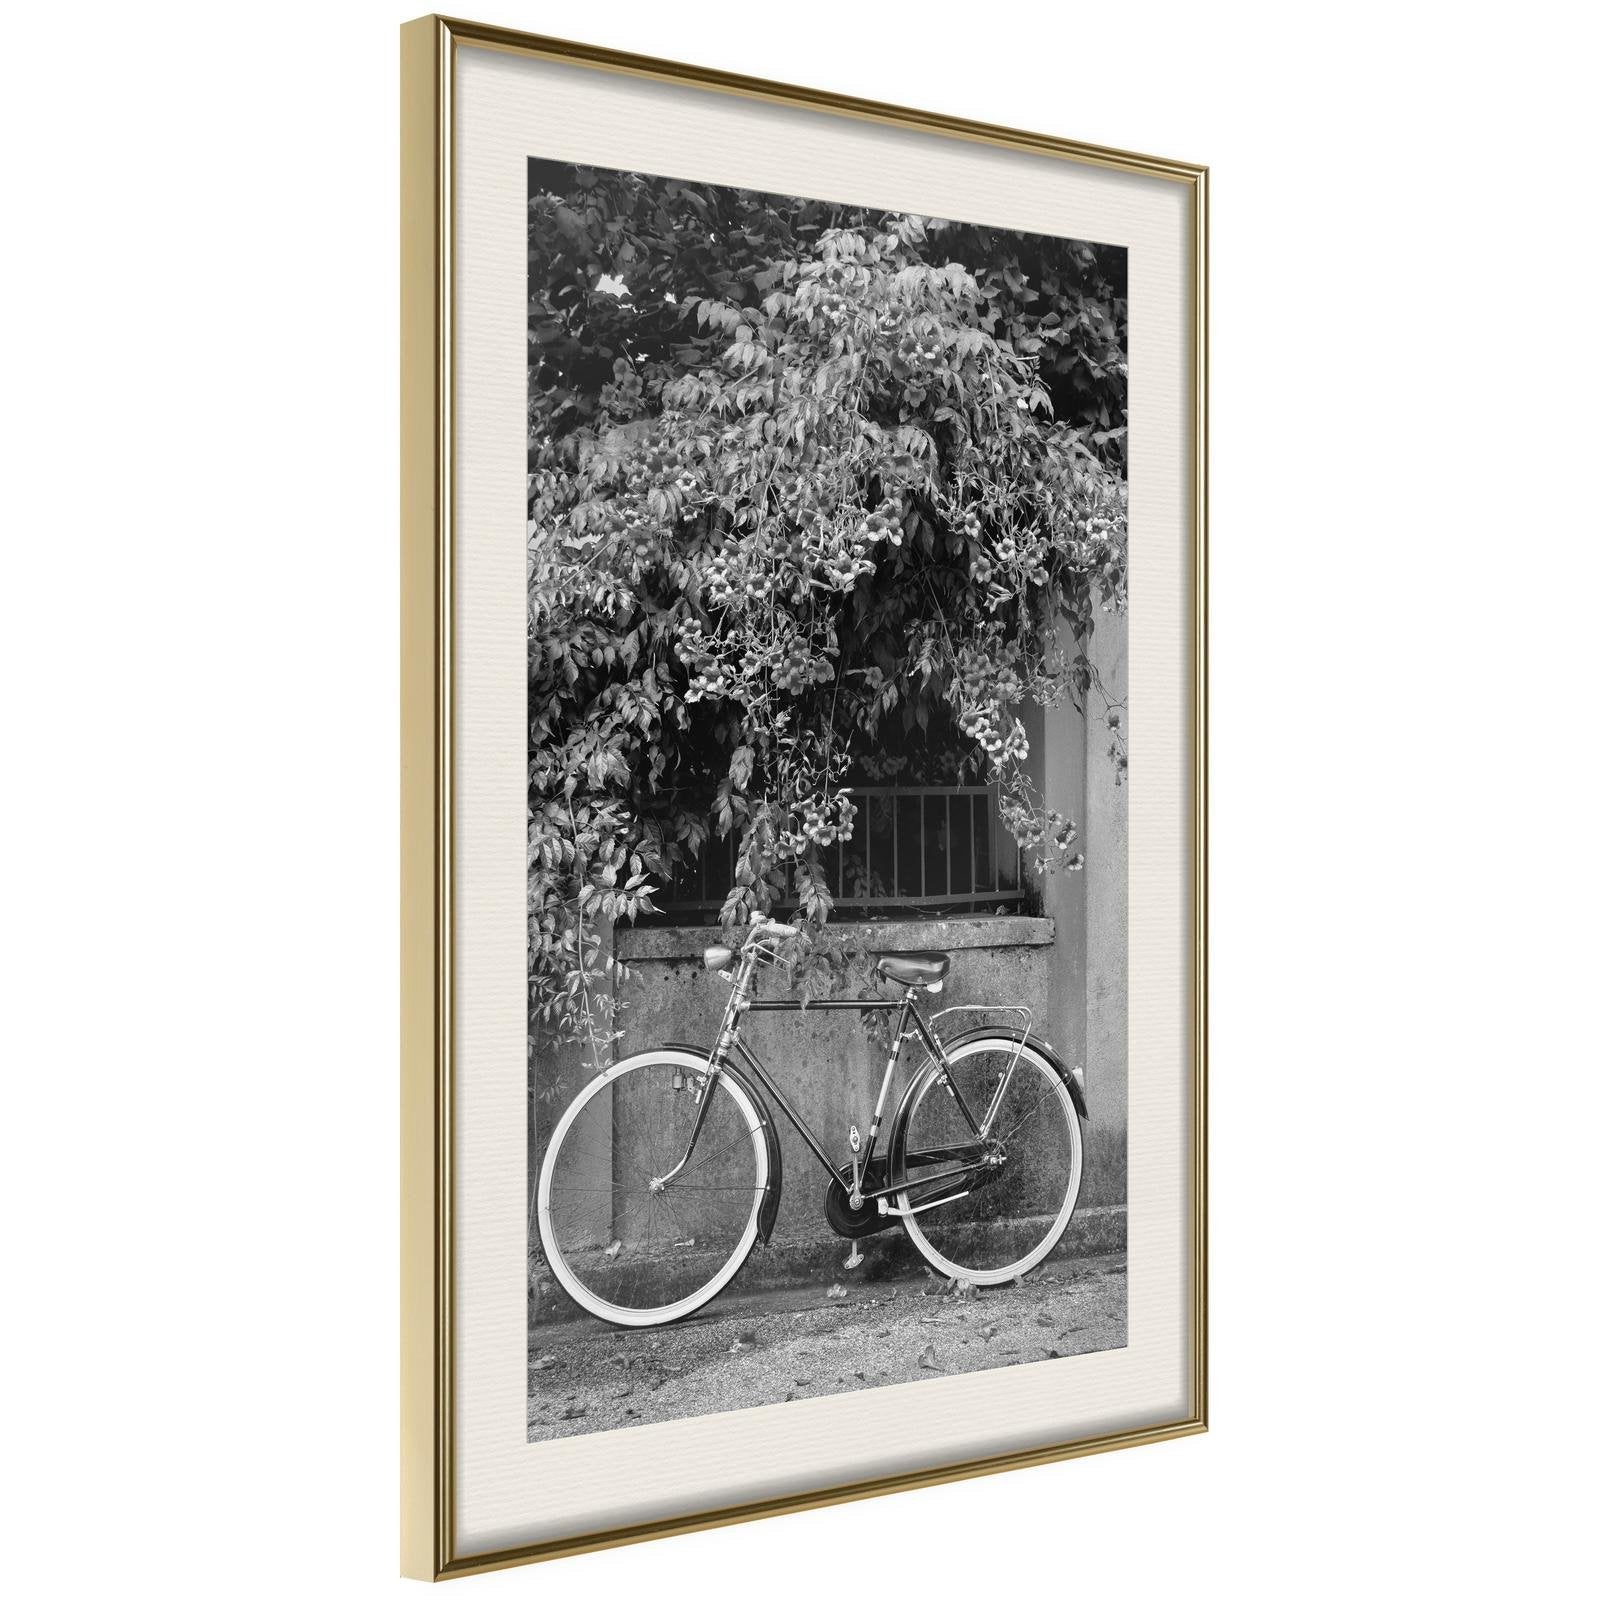 Inramad Poster / Tavla - Bicycle with White Tires-Poster Inramad-Artgeist-20x30-Guldram med passepartout-peaceofhome.se